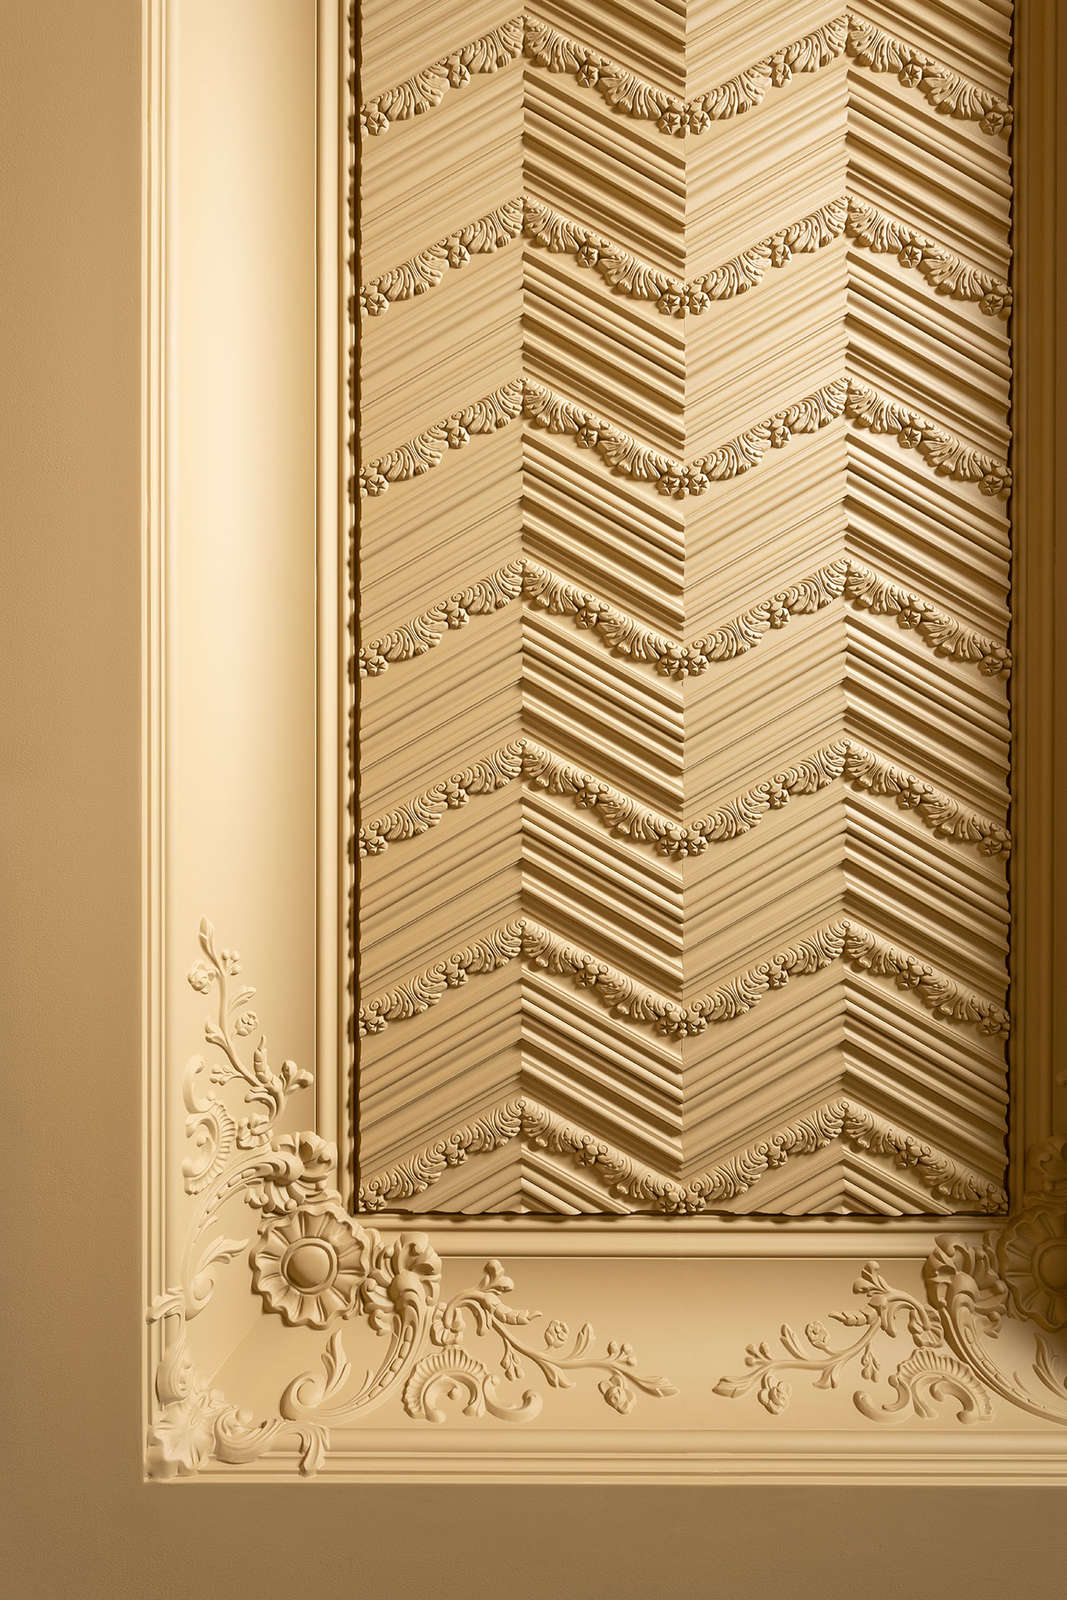             Decorative stucco moulding Moscow - C338B
        